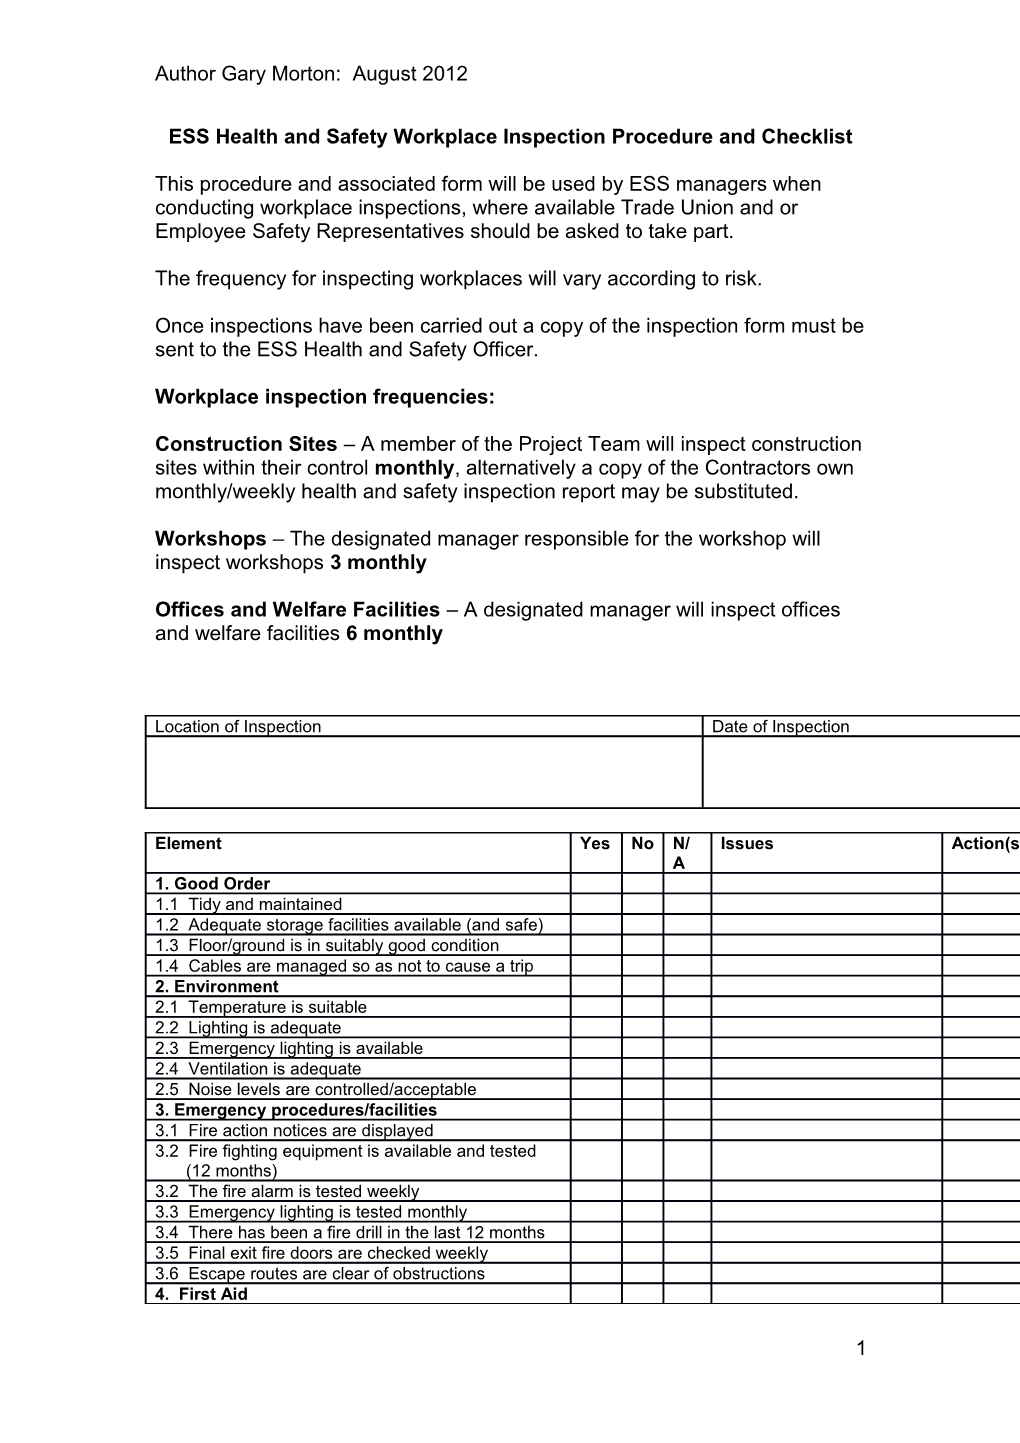 ESS Health and Safety Workplace Inspection Procedure and Checklist